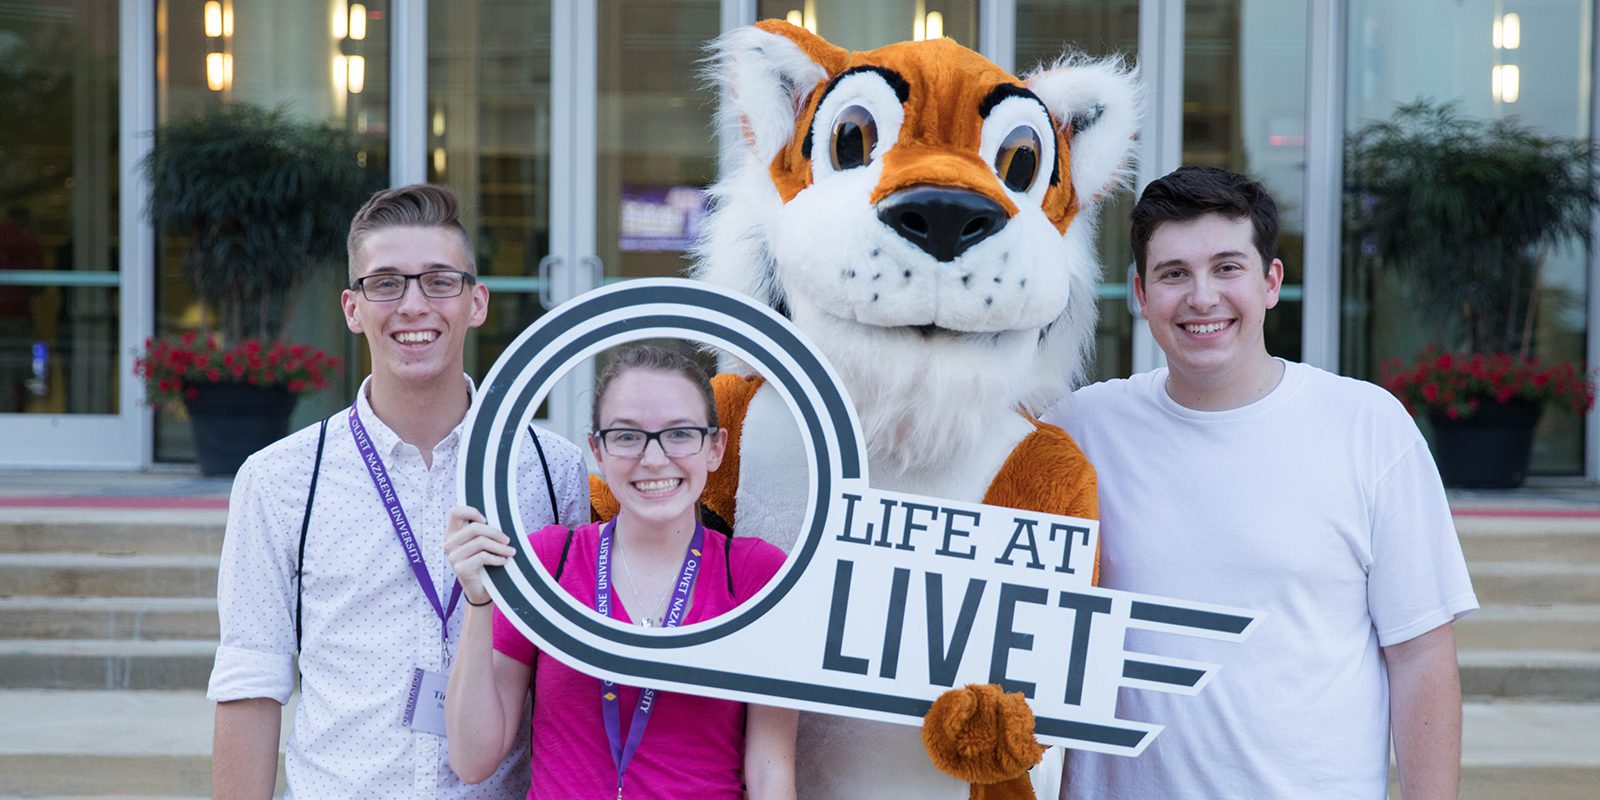 Olivet_Admissions_Orientation 2018_Toby Tiger with Students_Web2.jpg